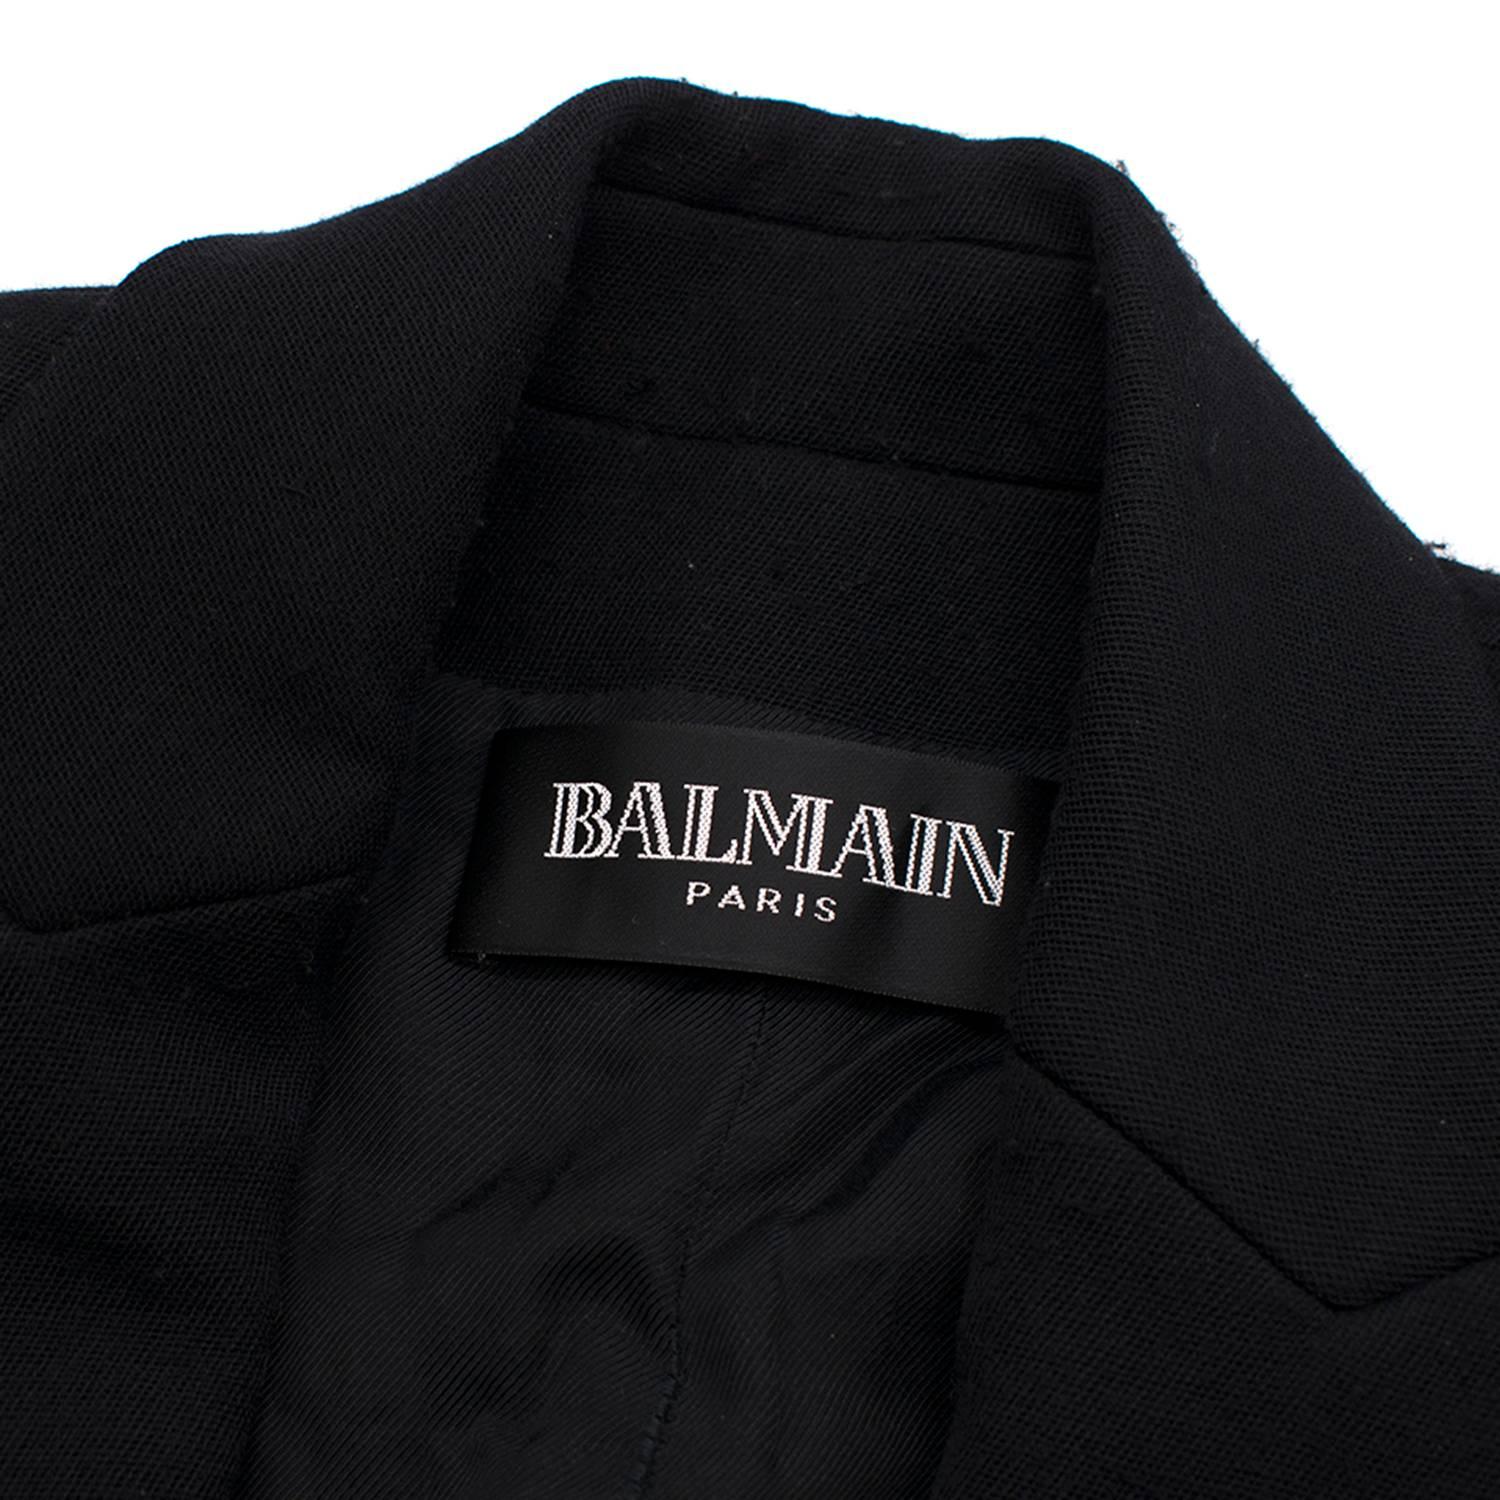 Balmain Black Single Breasted Blazer Jacket In Excellent Condition For Sale In London, GB